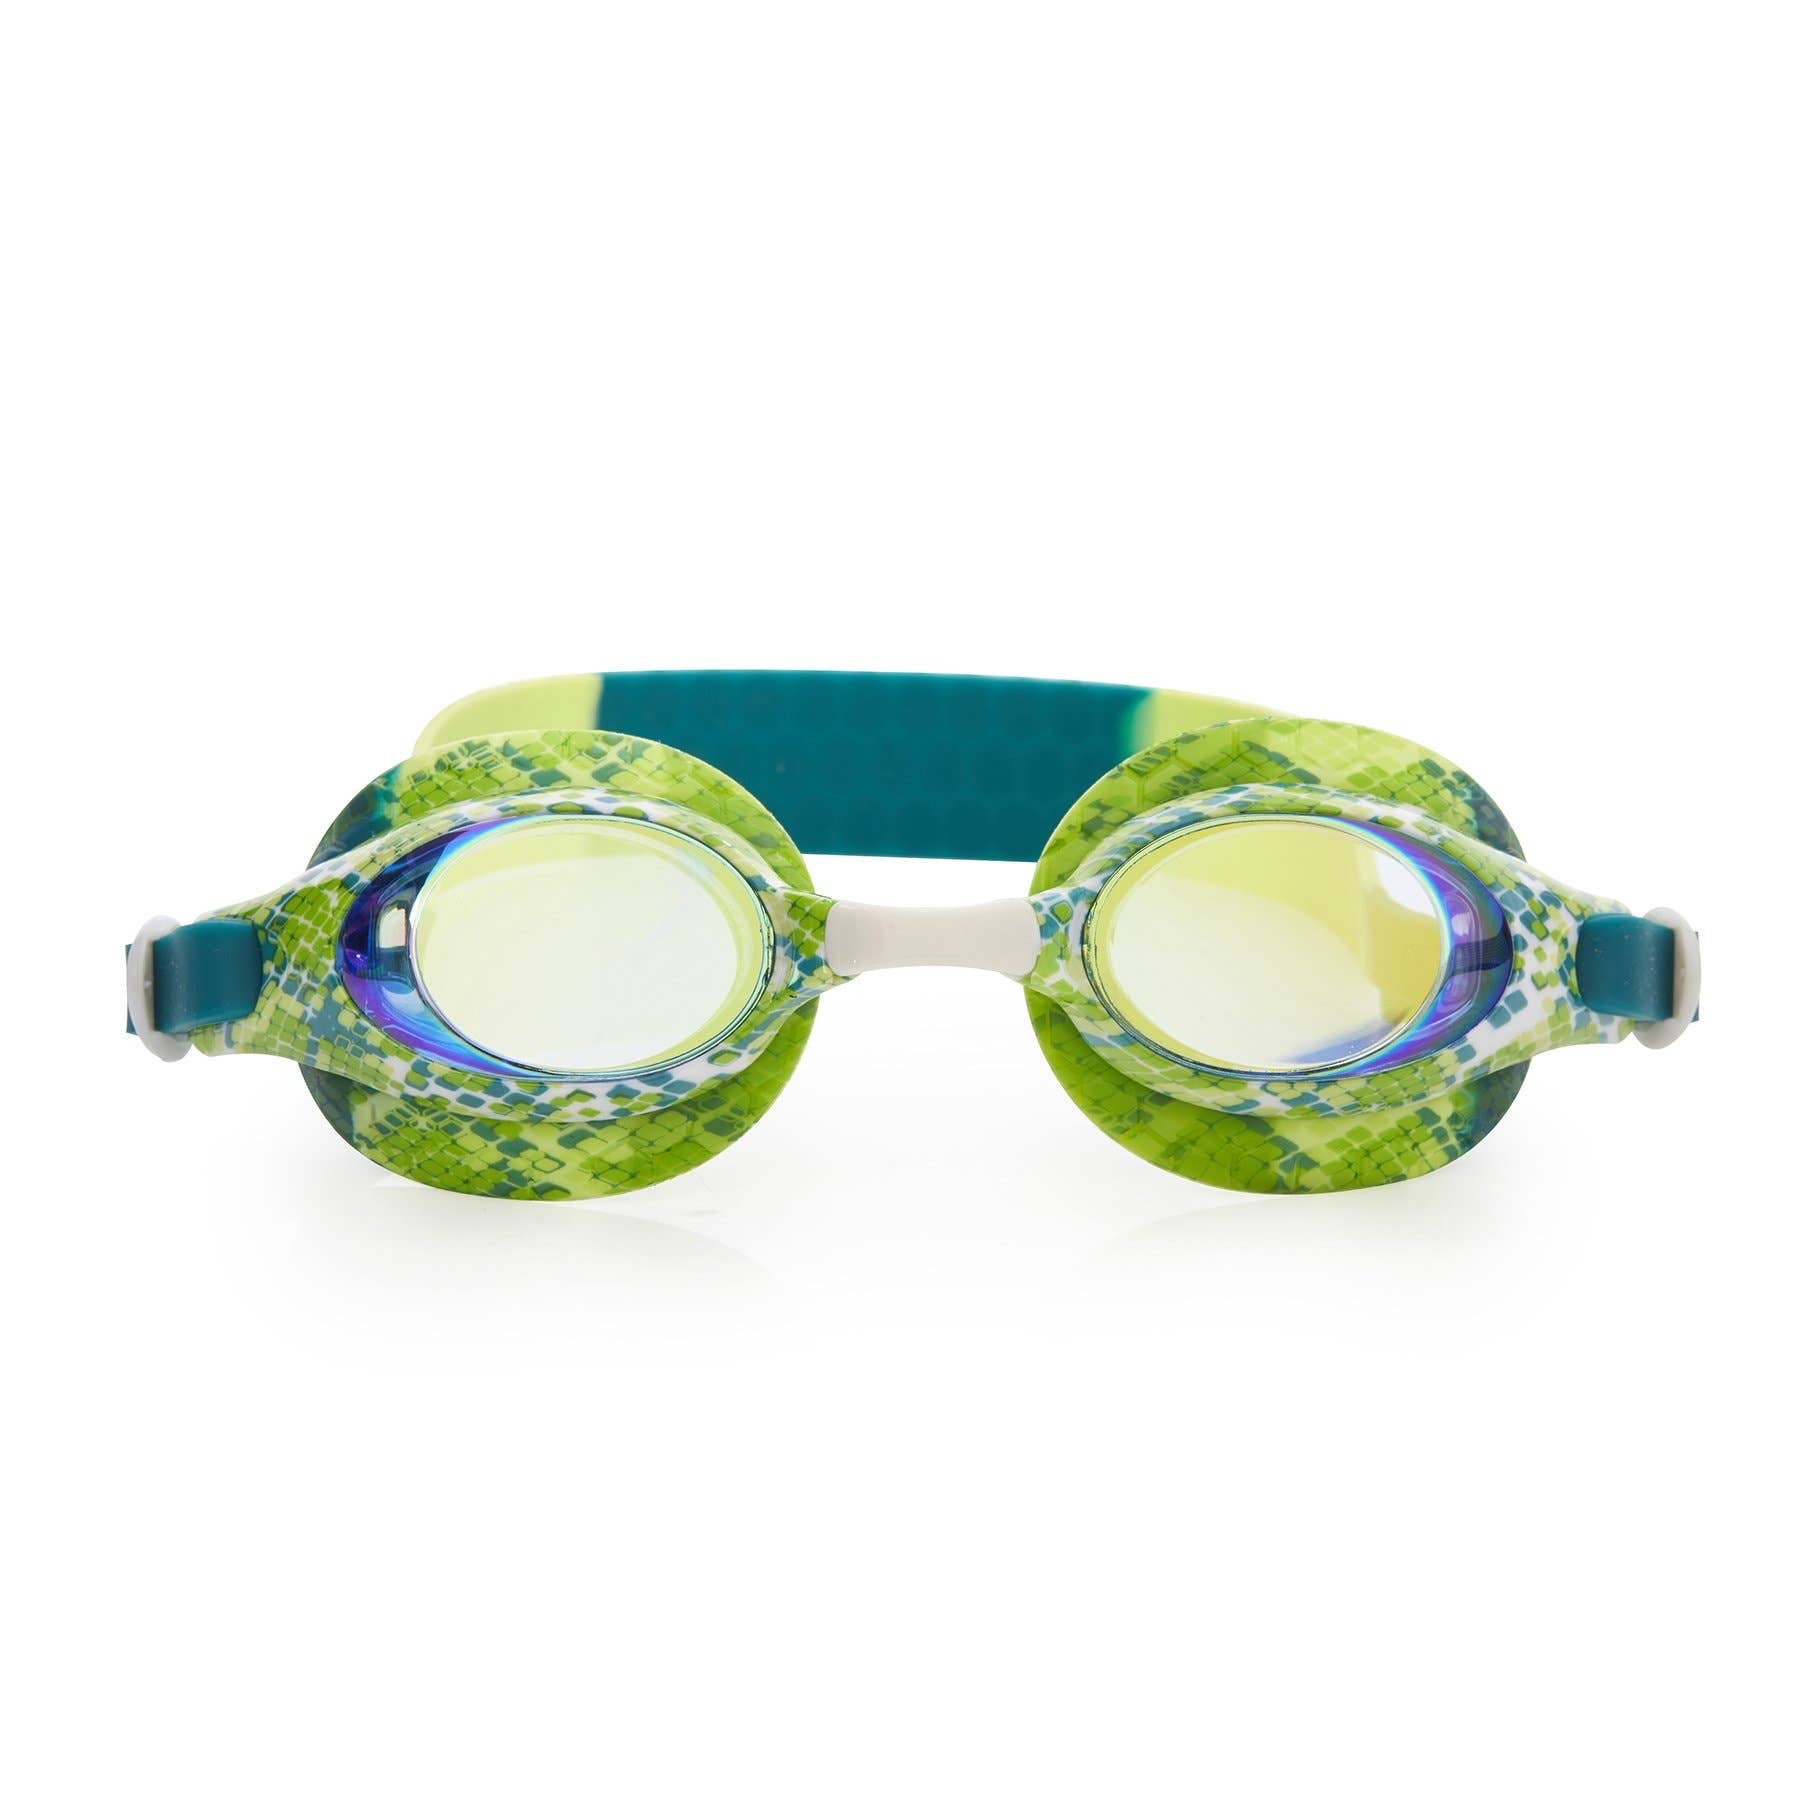 Jake the Snake Goggles green